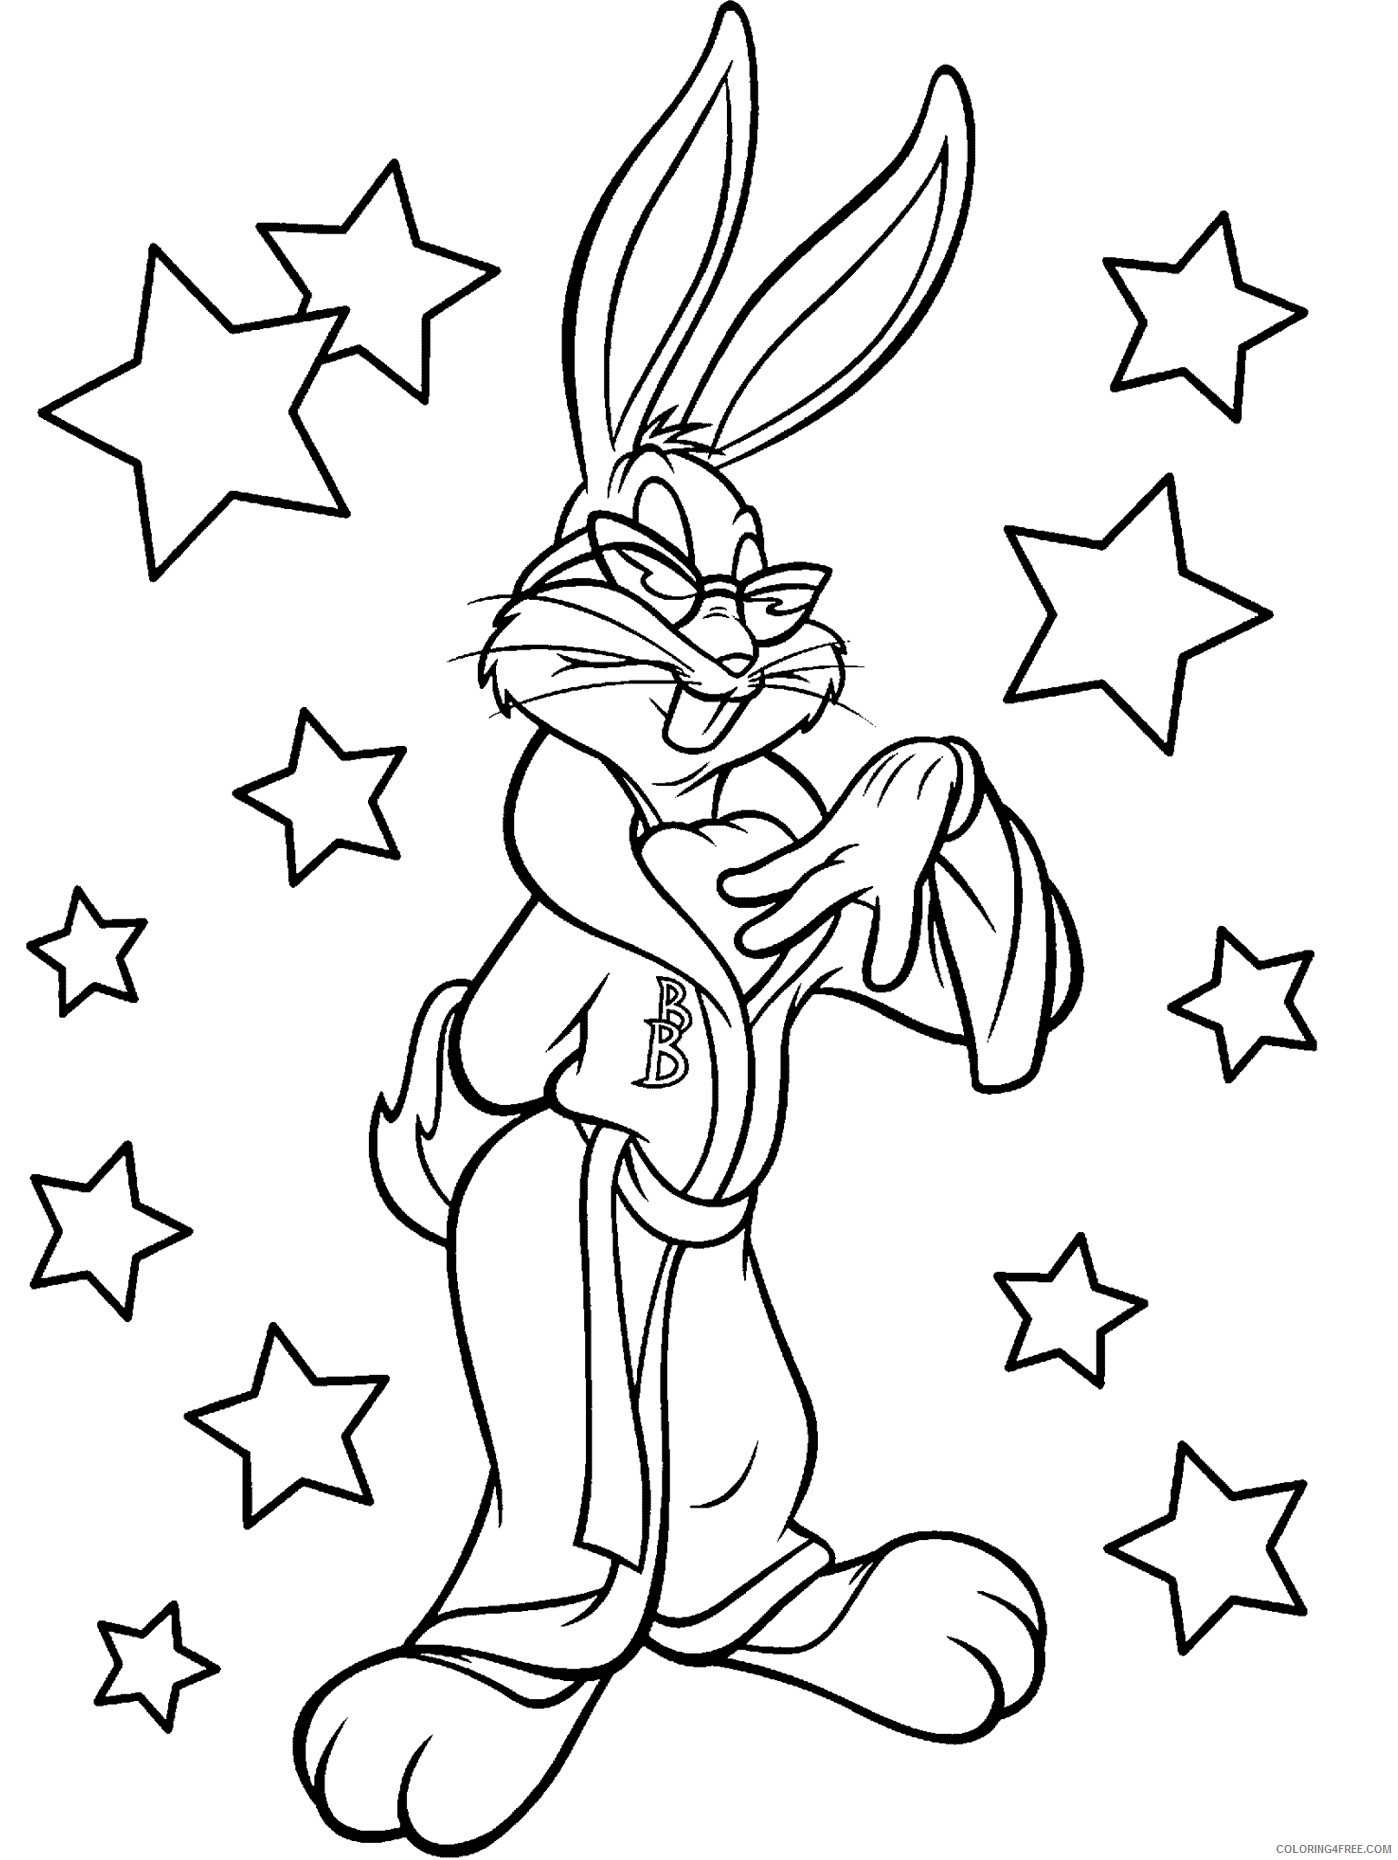 Bugs Bunny Coloring Pages Cartoons Bugs Bunny 2 Printable 2020 1402 Coloring4free